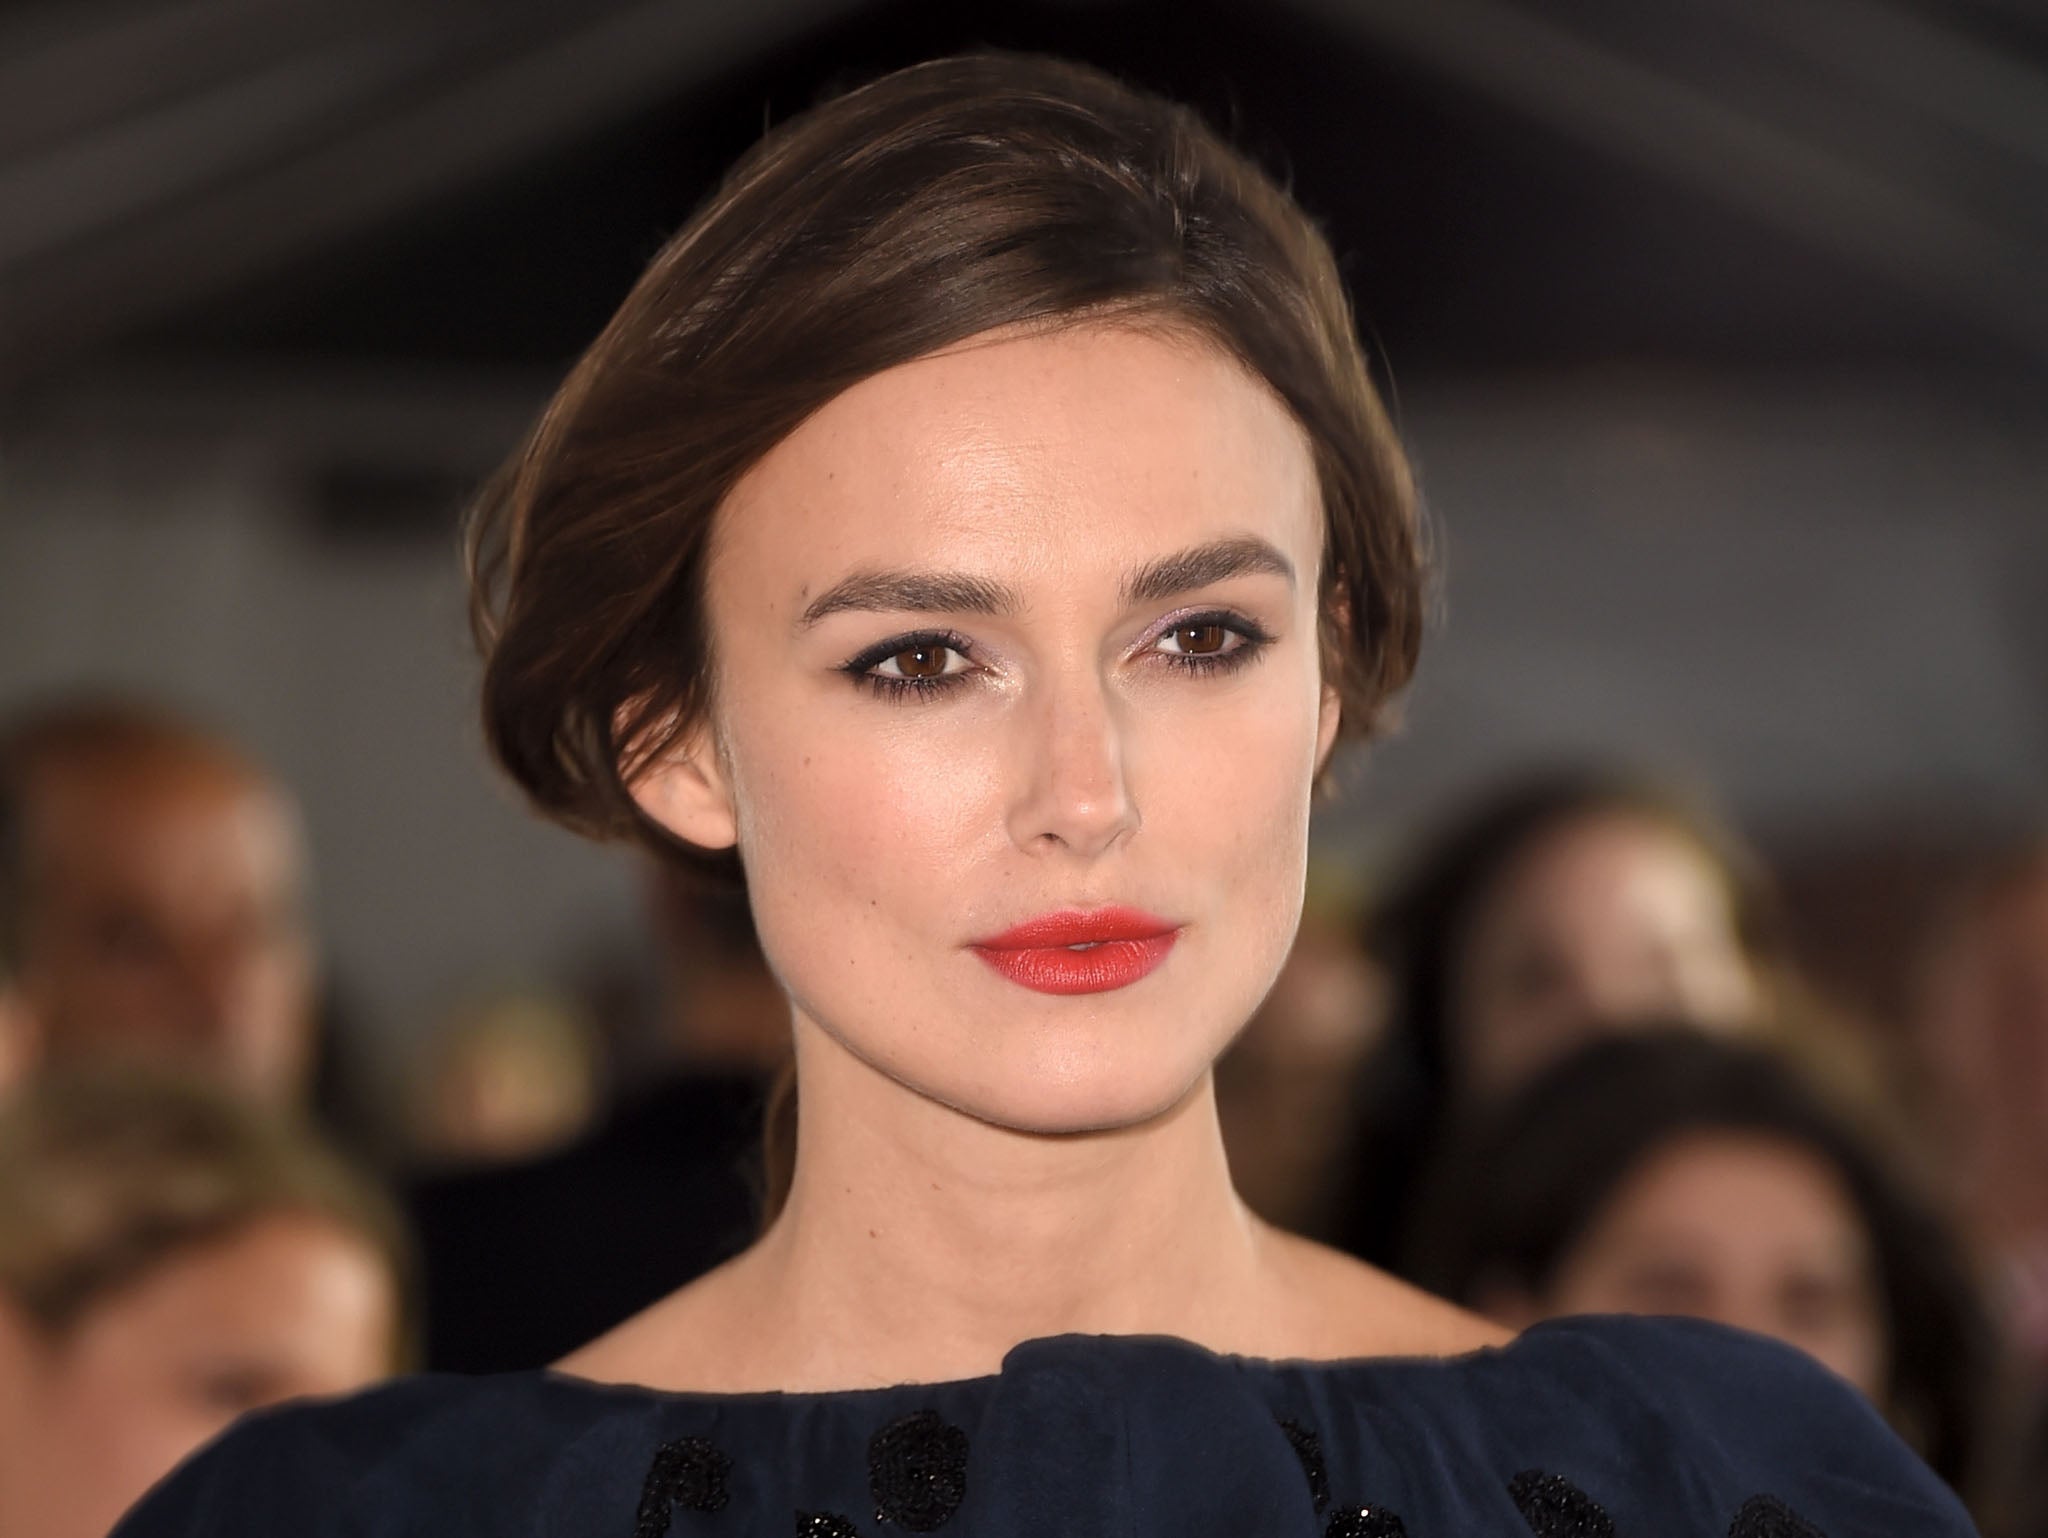 Keira Knightley at the premiere of Laggie at Toronto Film Festival 2014